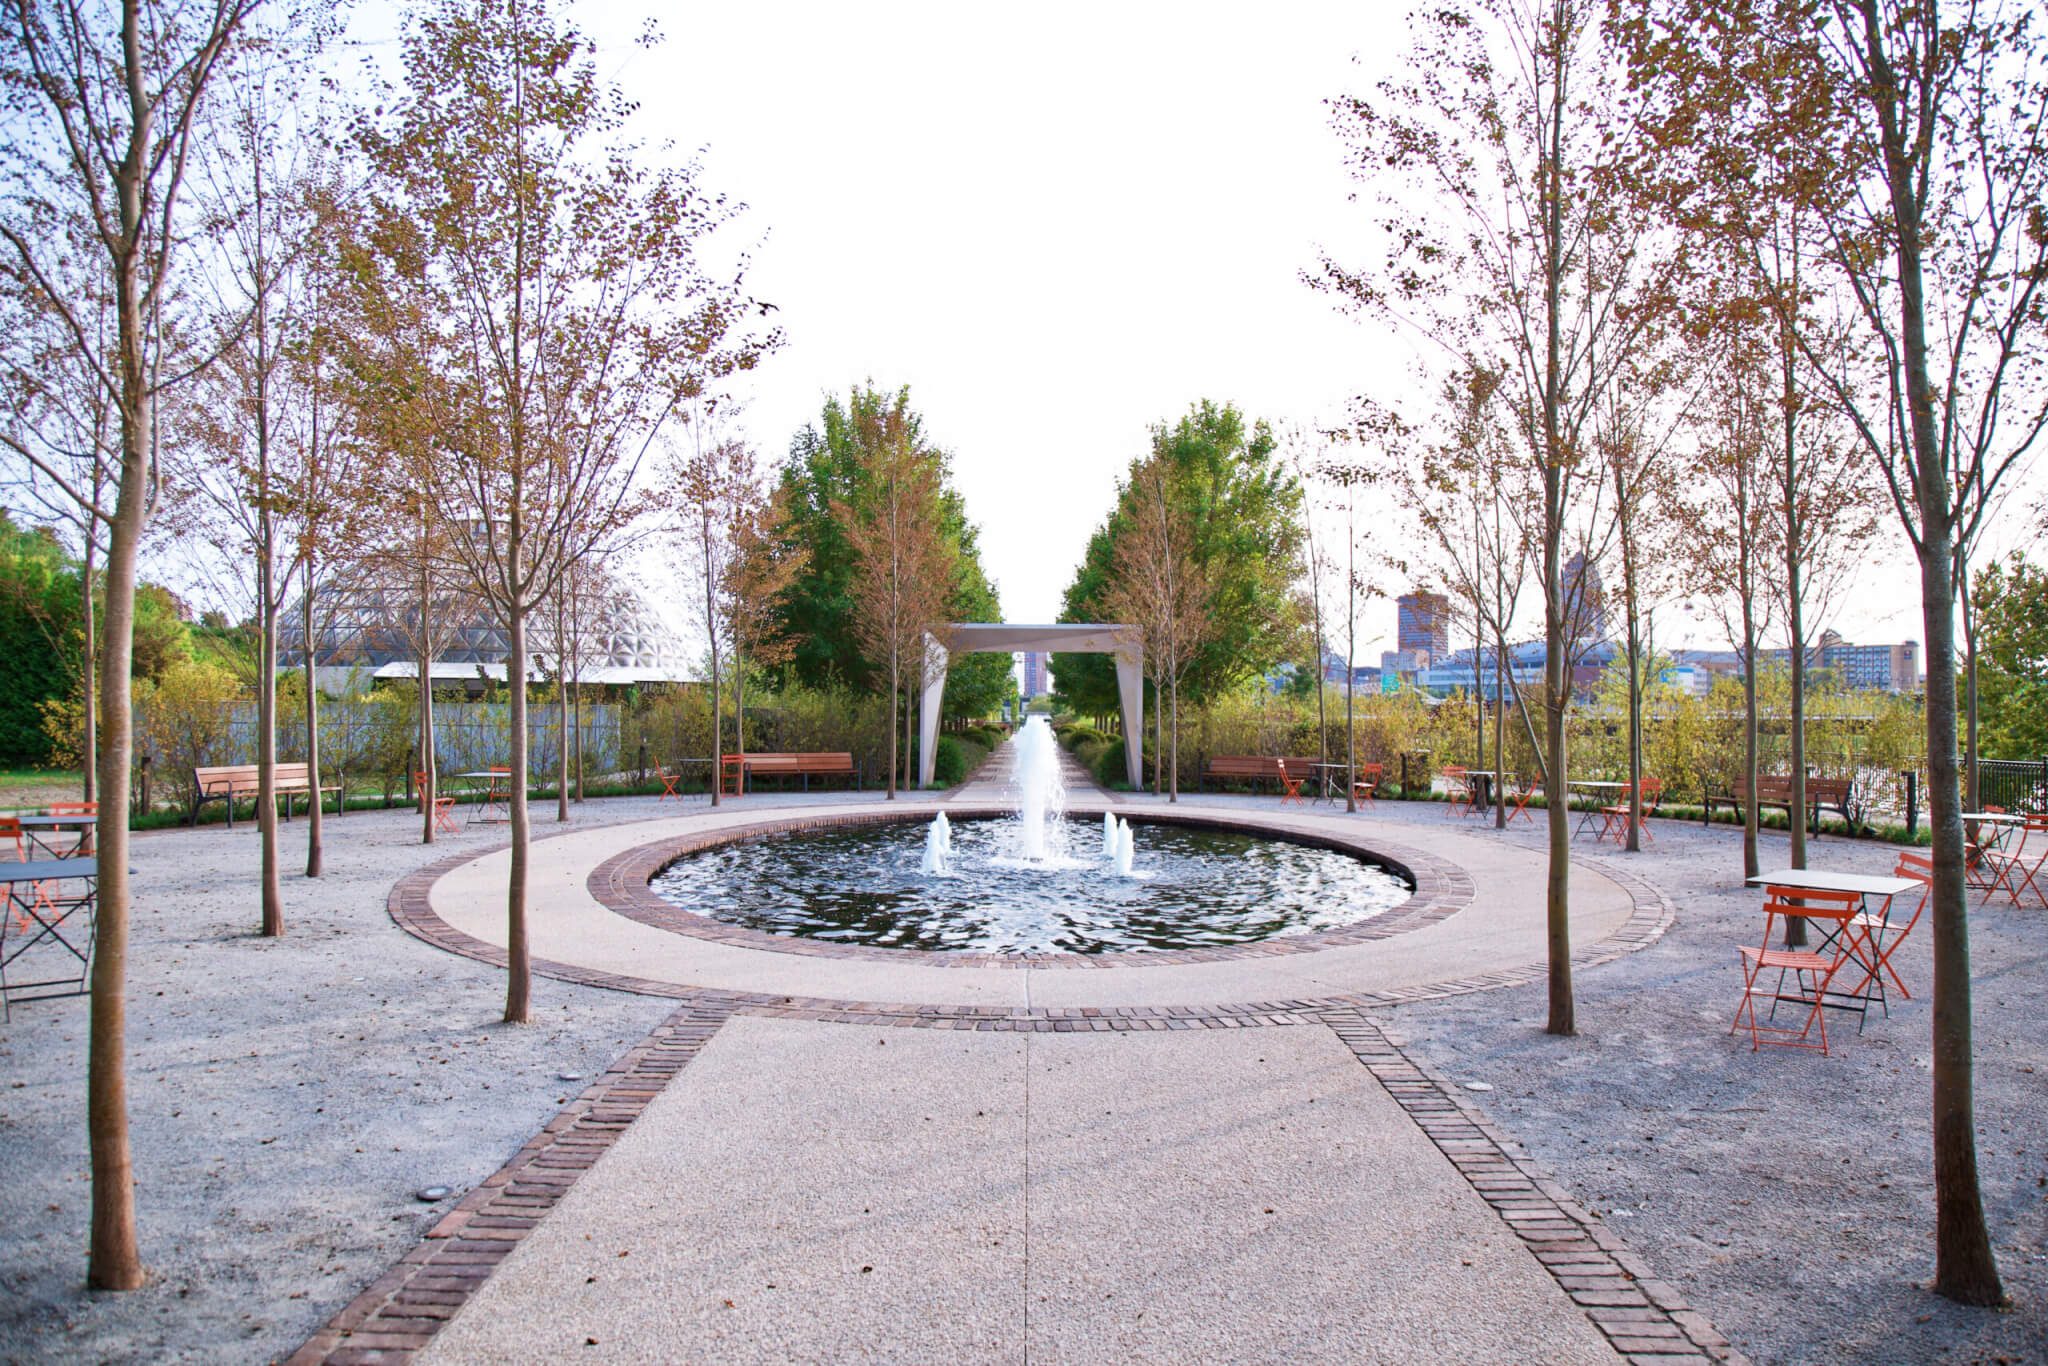 Fountain surrounded by gravel and skinny trees.